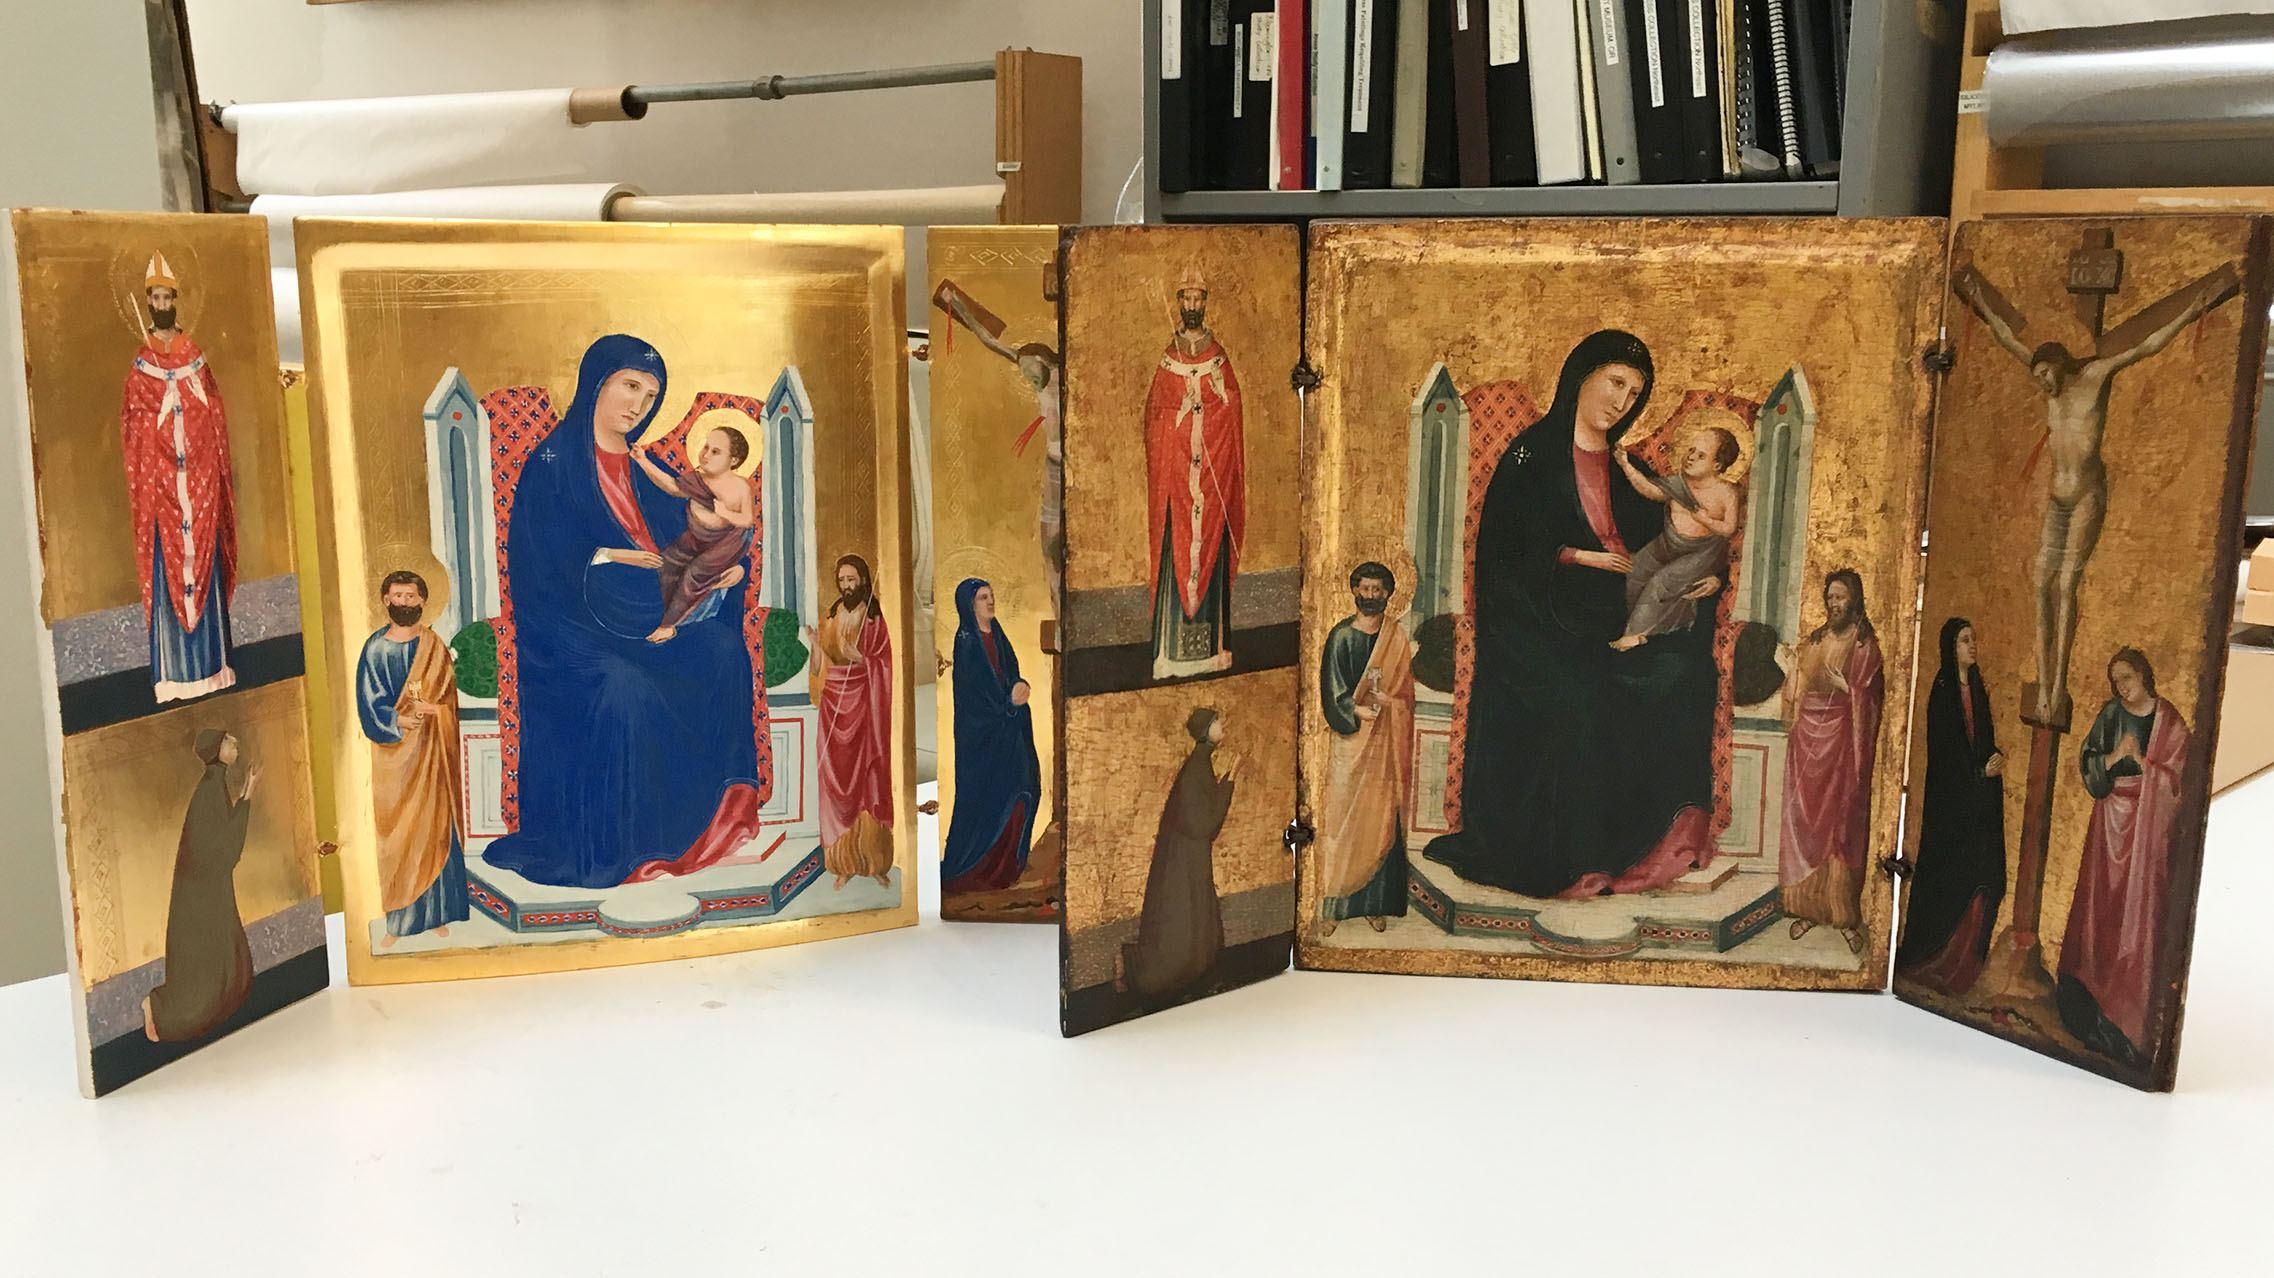 Reconstruction (left) and Madonna and Child with Saints and the Crucifixion (right).